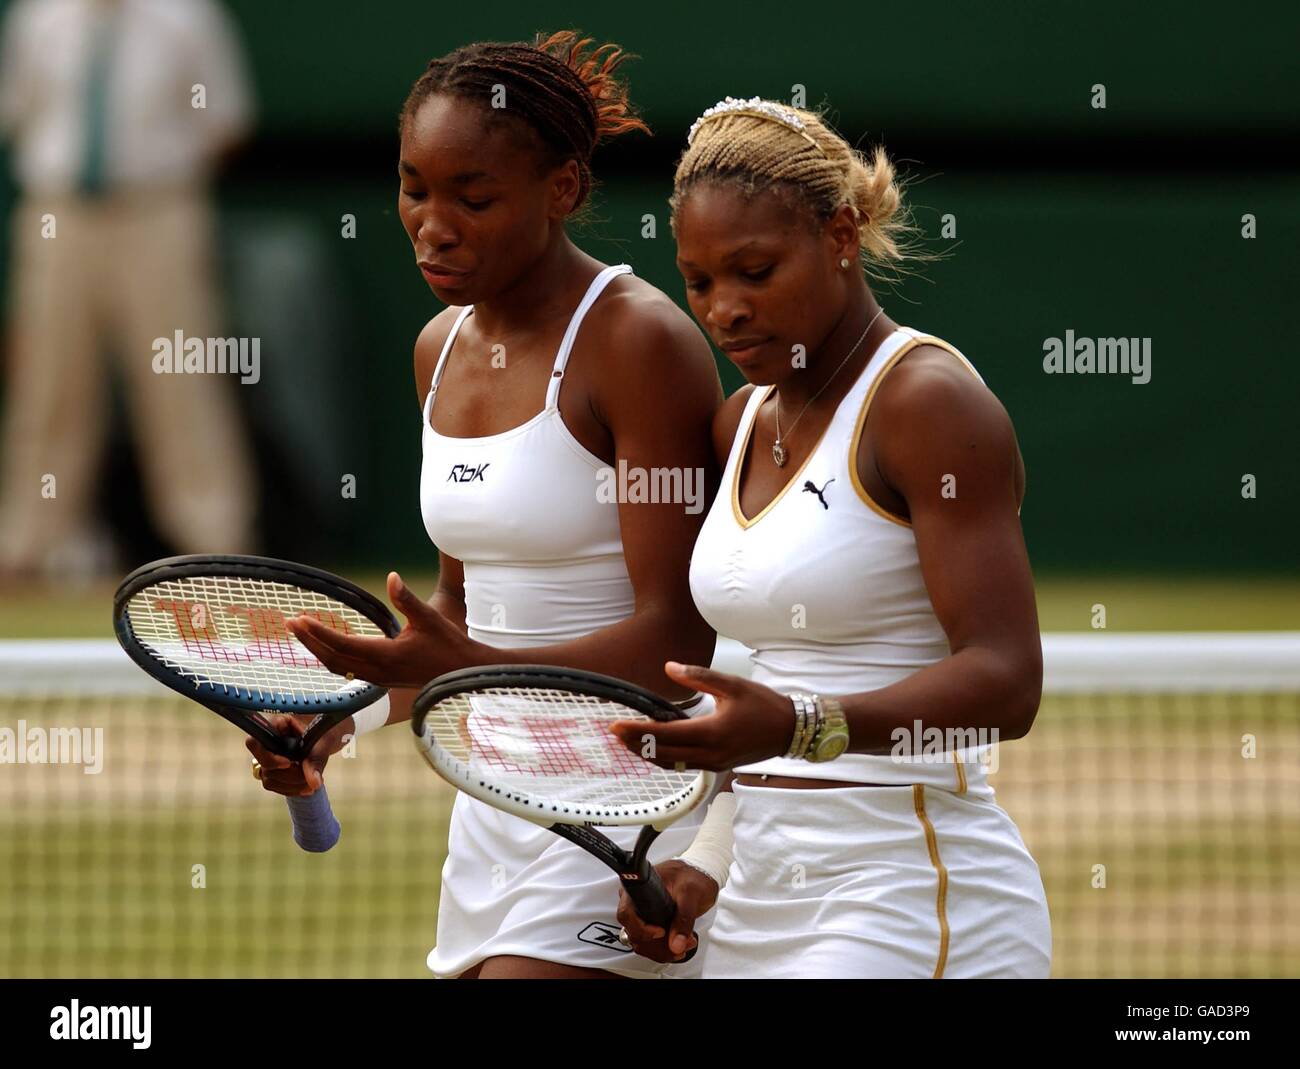 Tennis - Wimbledon 2002. Venus and Serena Williams together for their doubles match after their singles final earlier in the day Stock Photo